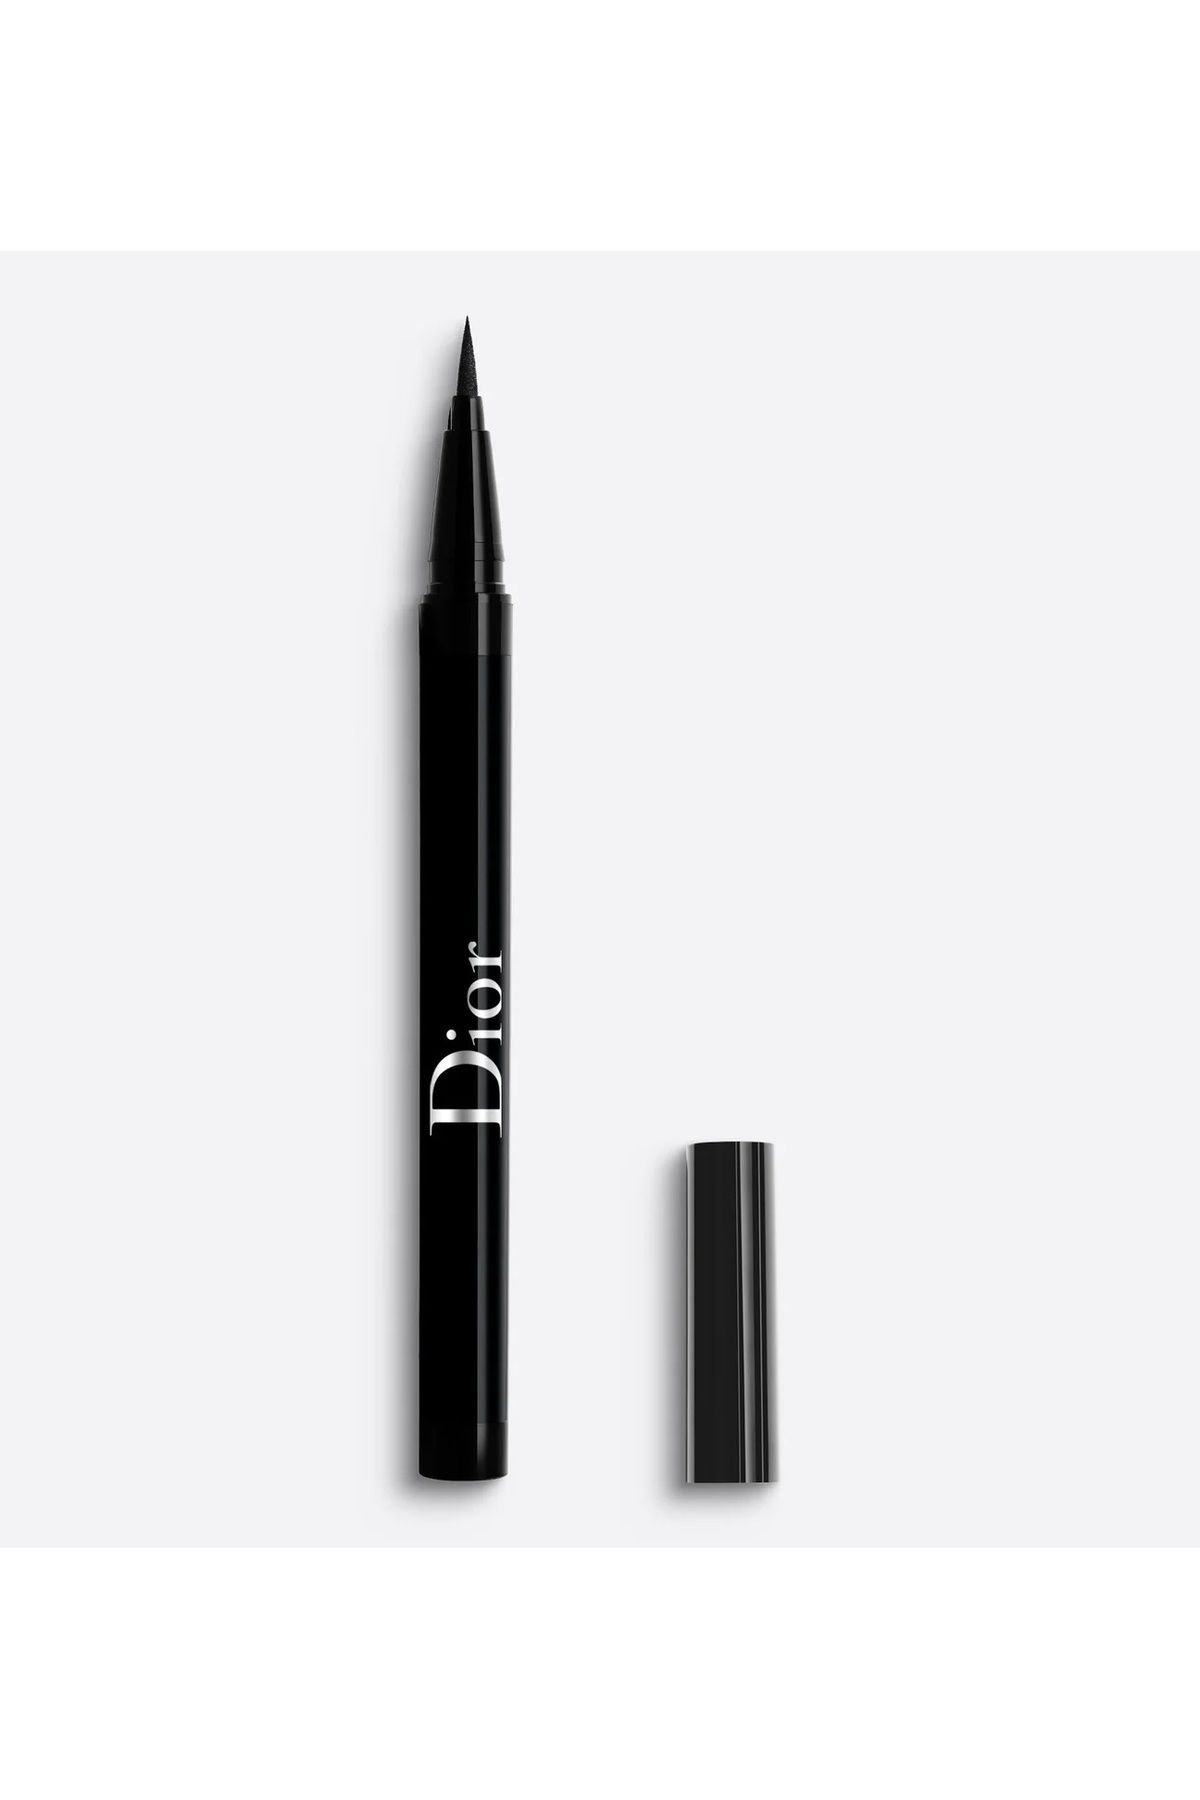 Dior 24 HOUR EFFECTİVE, LONG LASTİNG, INTENSELY PİGMENTED, SATİN-MATTE FİNİSH EYELİNER PSSN1978